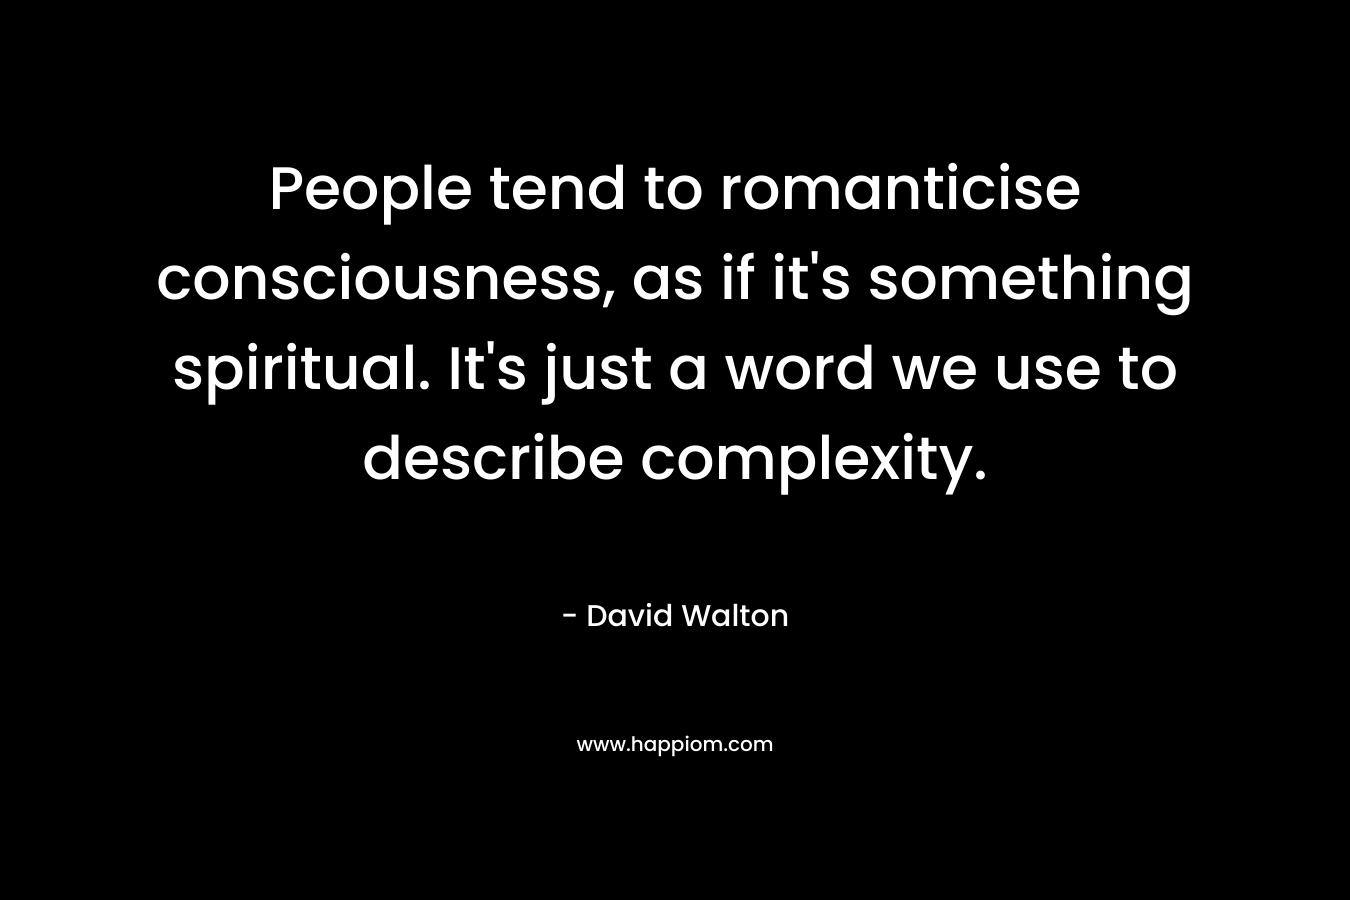 People tend to romanticise consciousness, as if it's something spiritual. It's just a word we use to describe complexity.